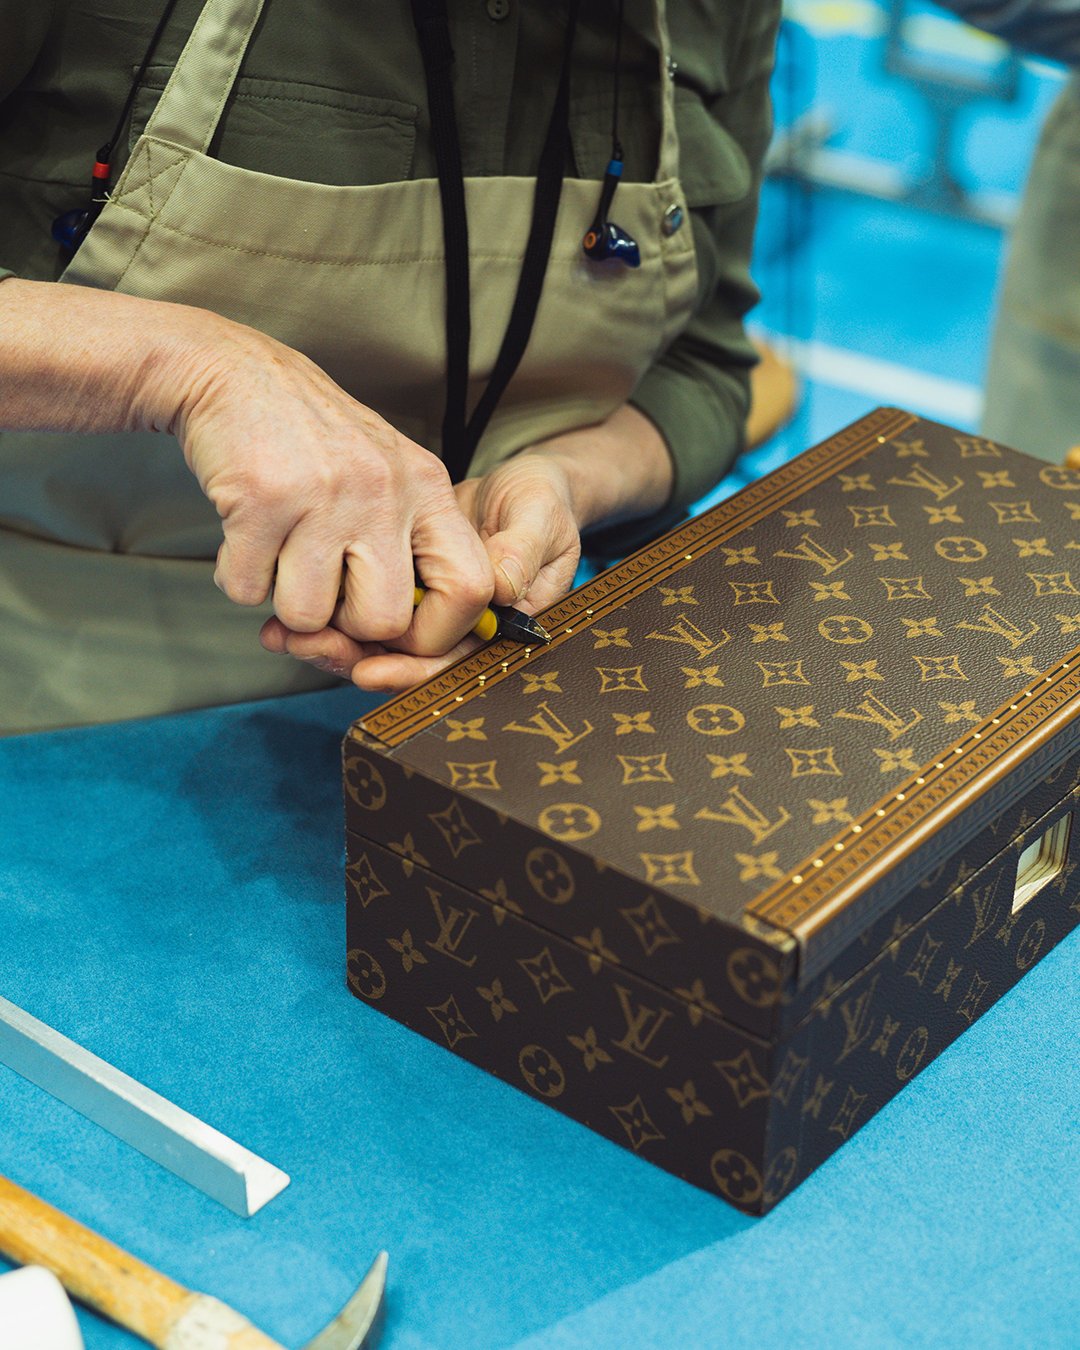 Louis Vuitton invites candidates to never stop dreaming with new Louis  Vuitton Jobs Recruitment Site - LVMH